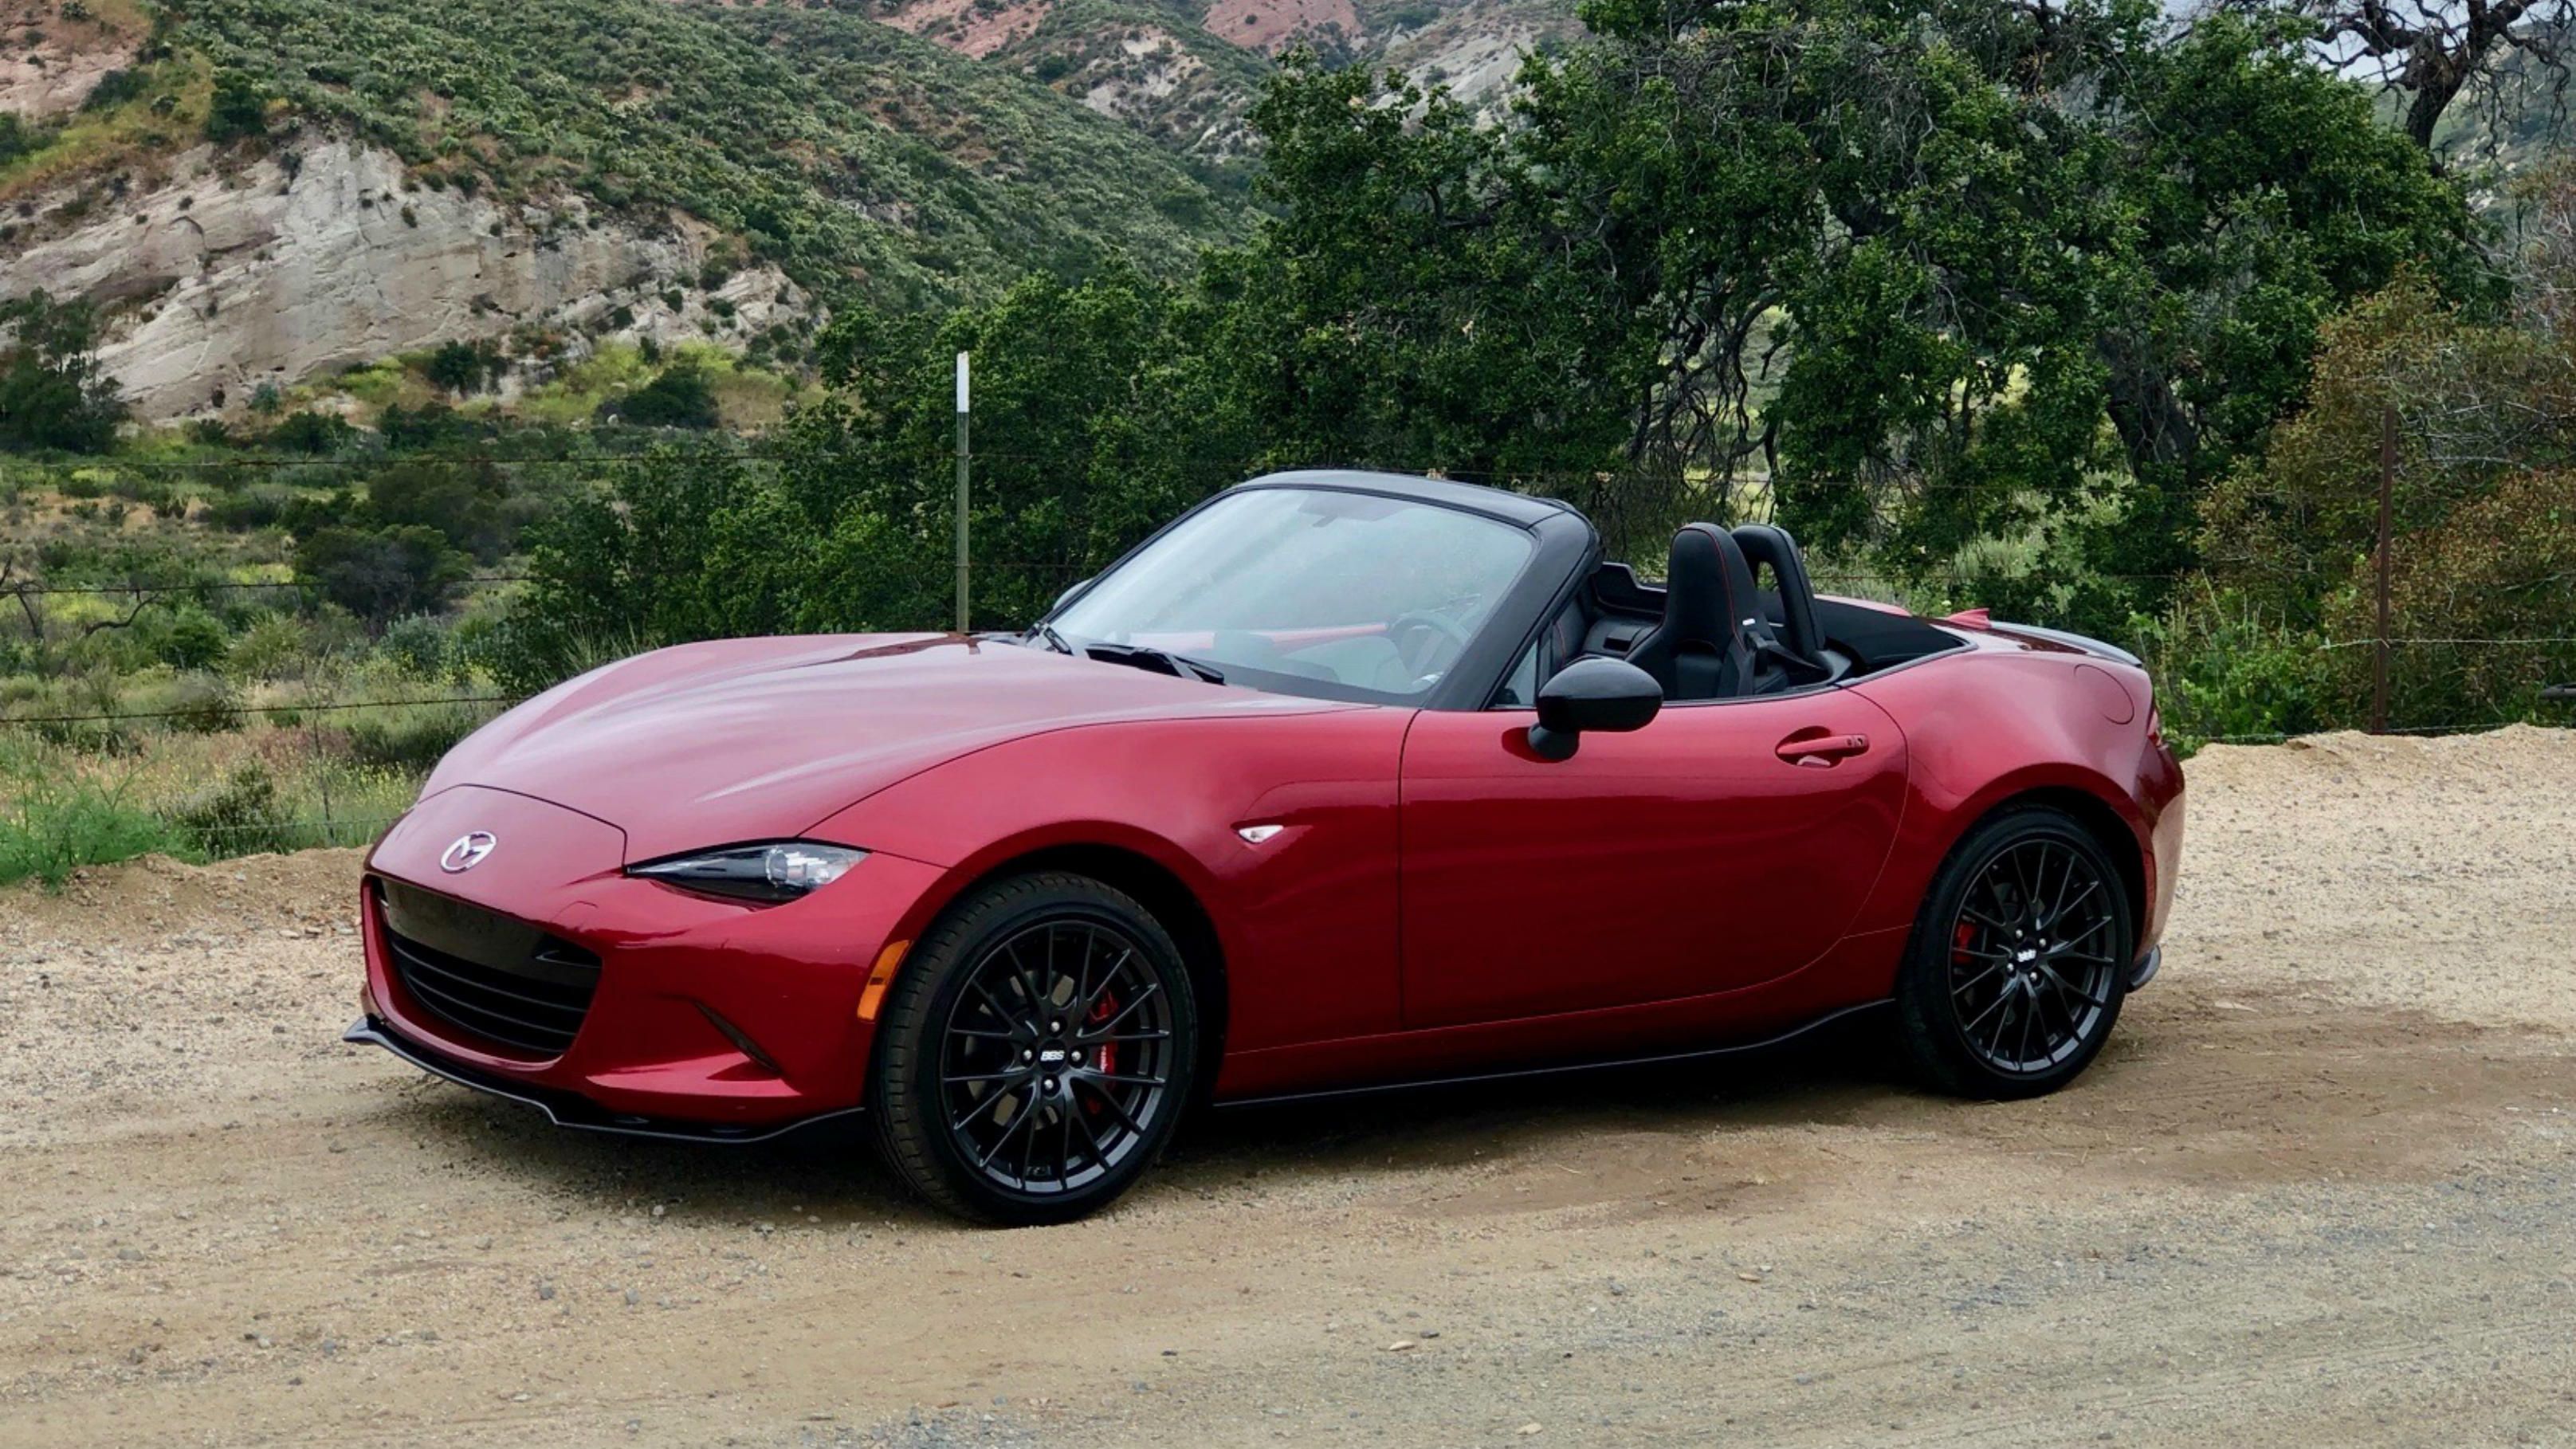 Cherry red convertible 2019 Mazda MX-5 off road